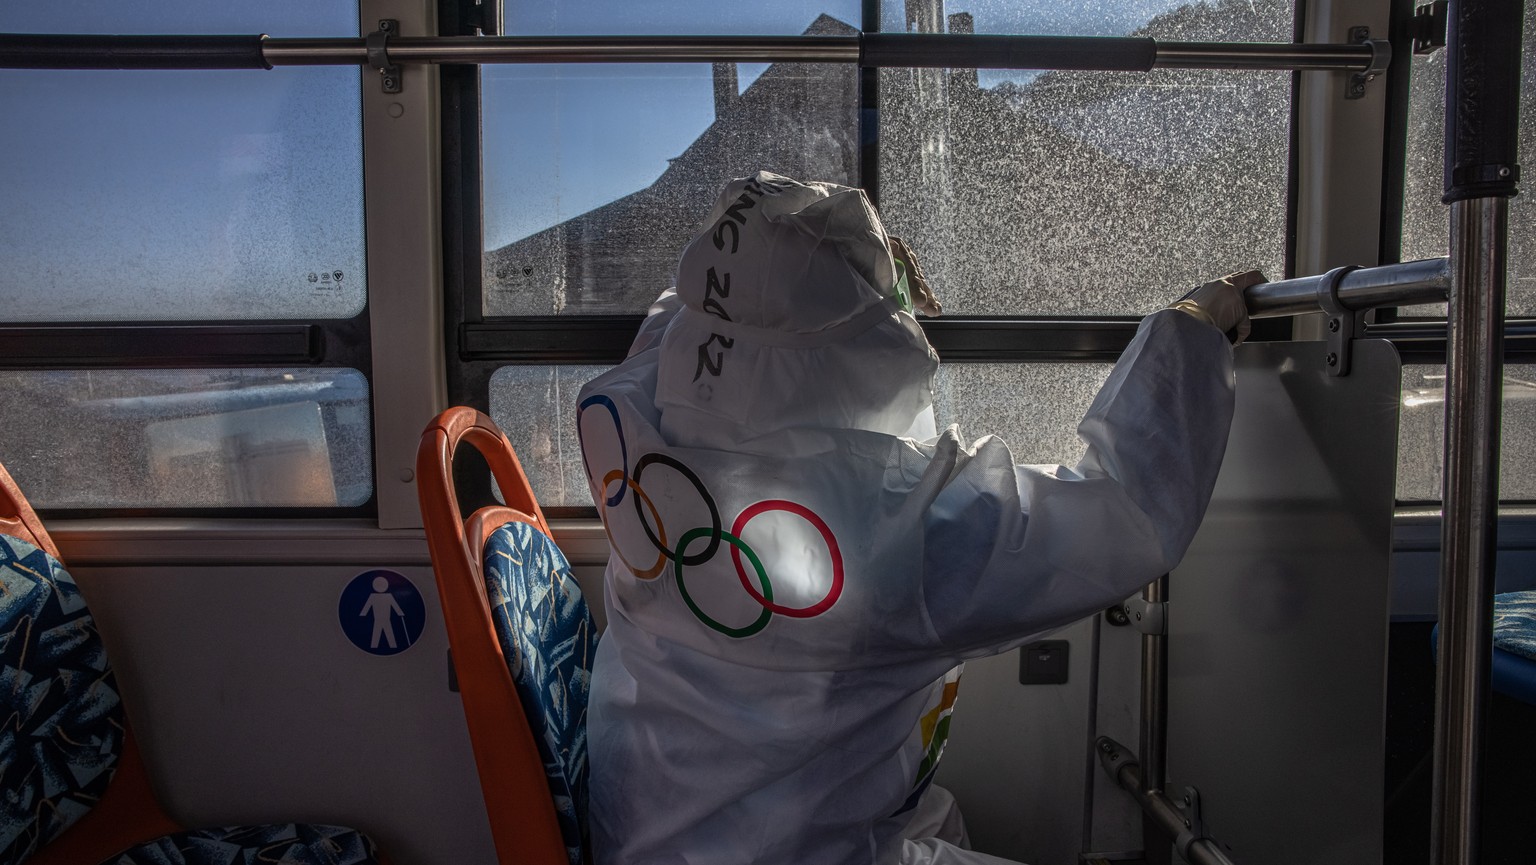 epa09716426 A person wearing protective gear with Olympic rings on it, rides a bus inside the Olympic COVID-19 &#039;bubble?, near the venues for Beijing 2022 Winter Olympics, in Zhangjiakou, China, 2 ...